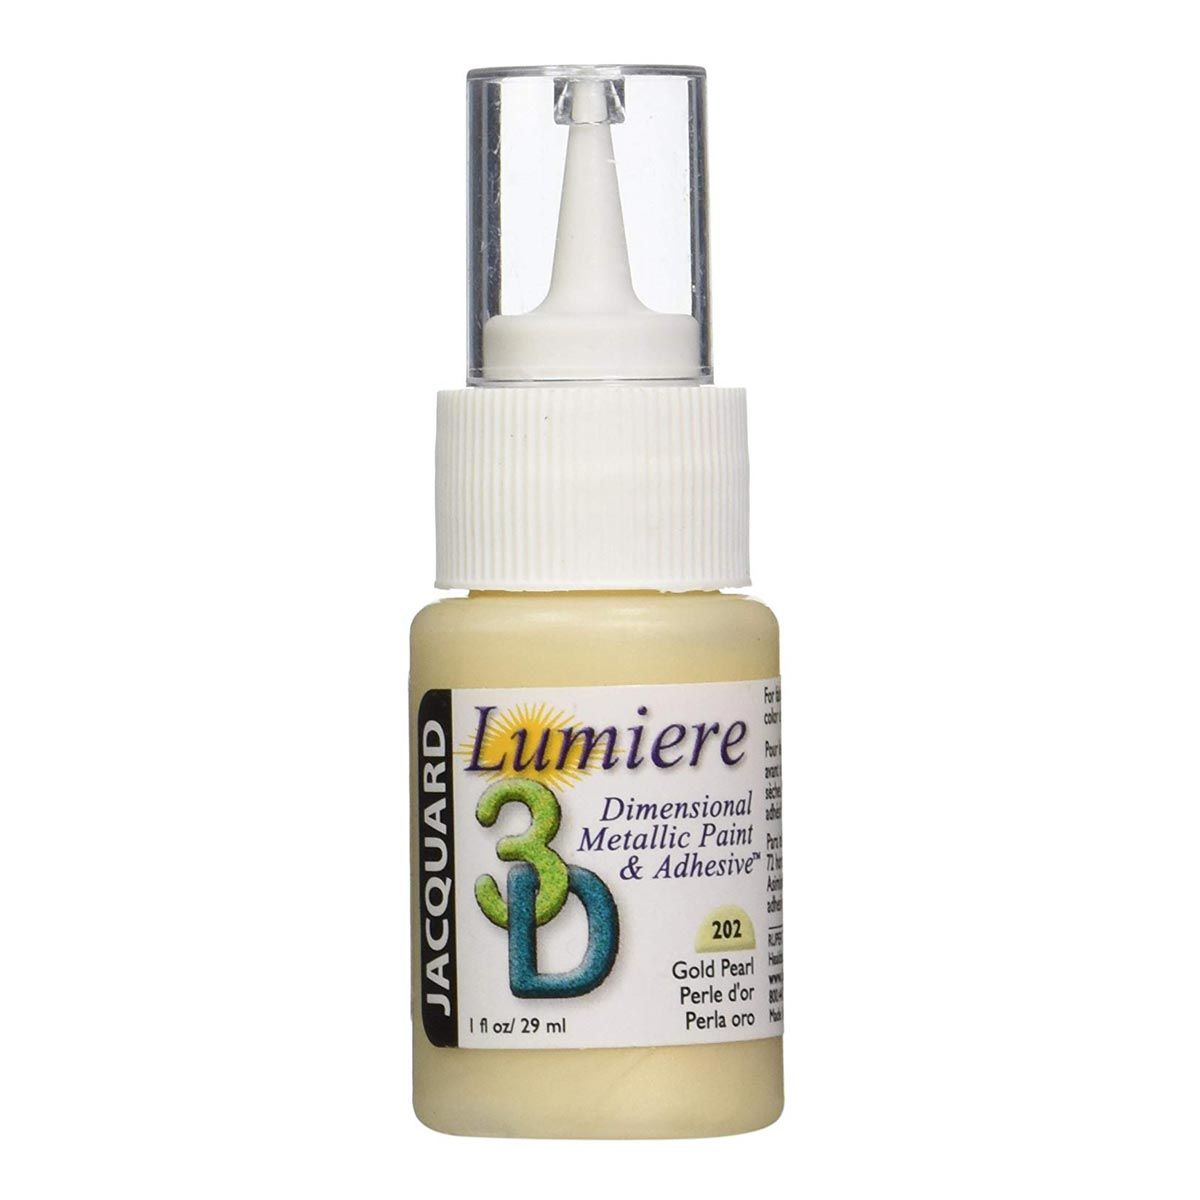 Lumiere 3D Metallic Paint & Adhesive, Gold Pearl 1oz